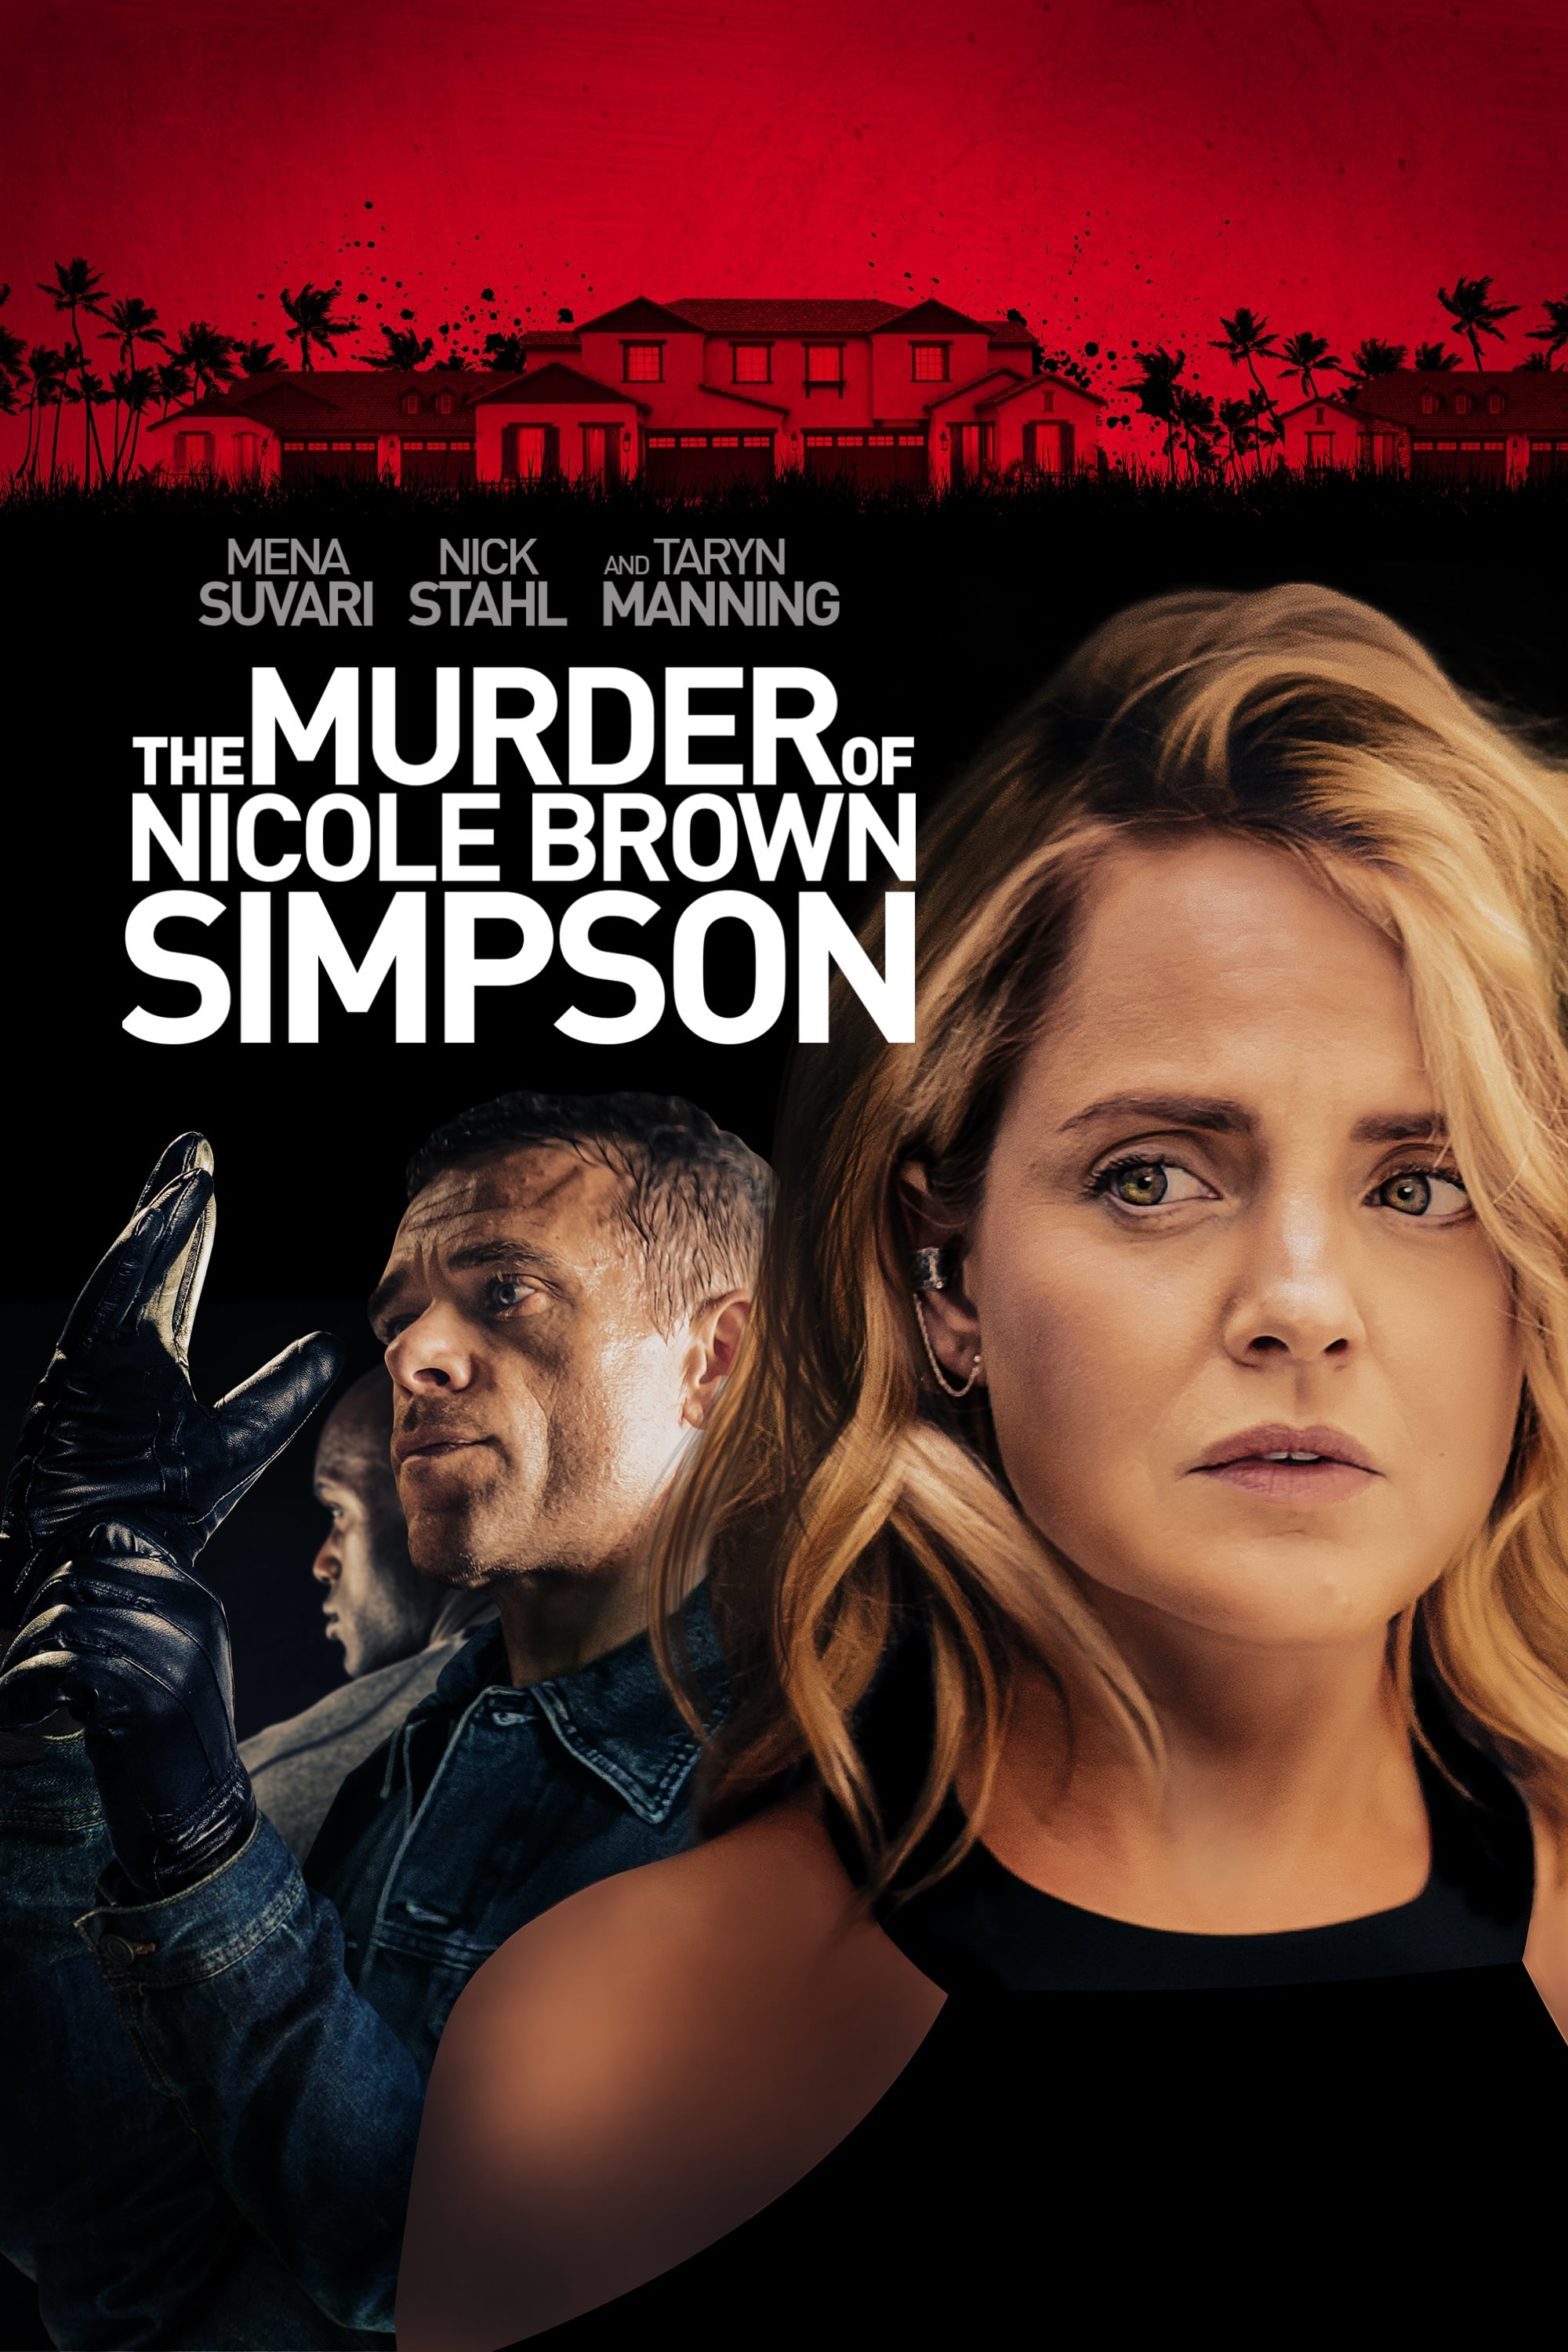 Poster for the movie "The Murder of Nicole Brown Simpson"